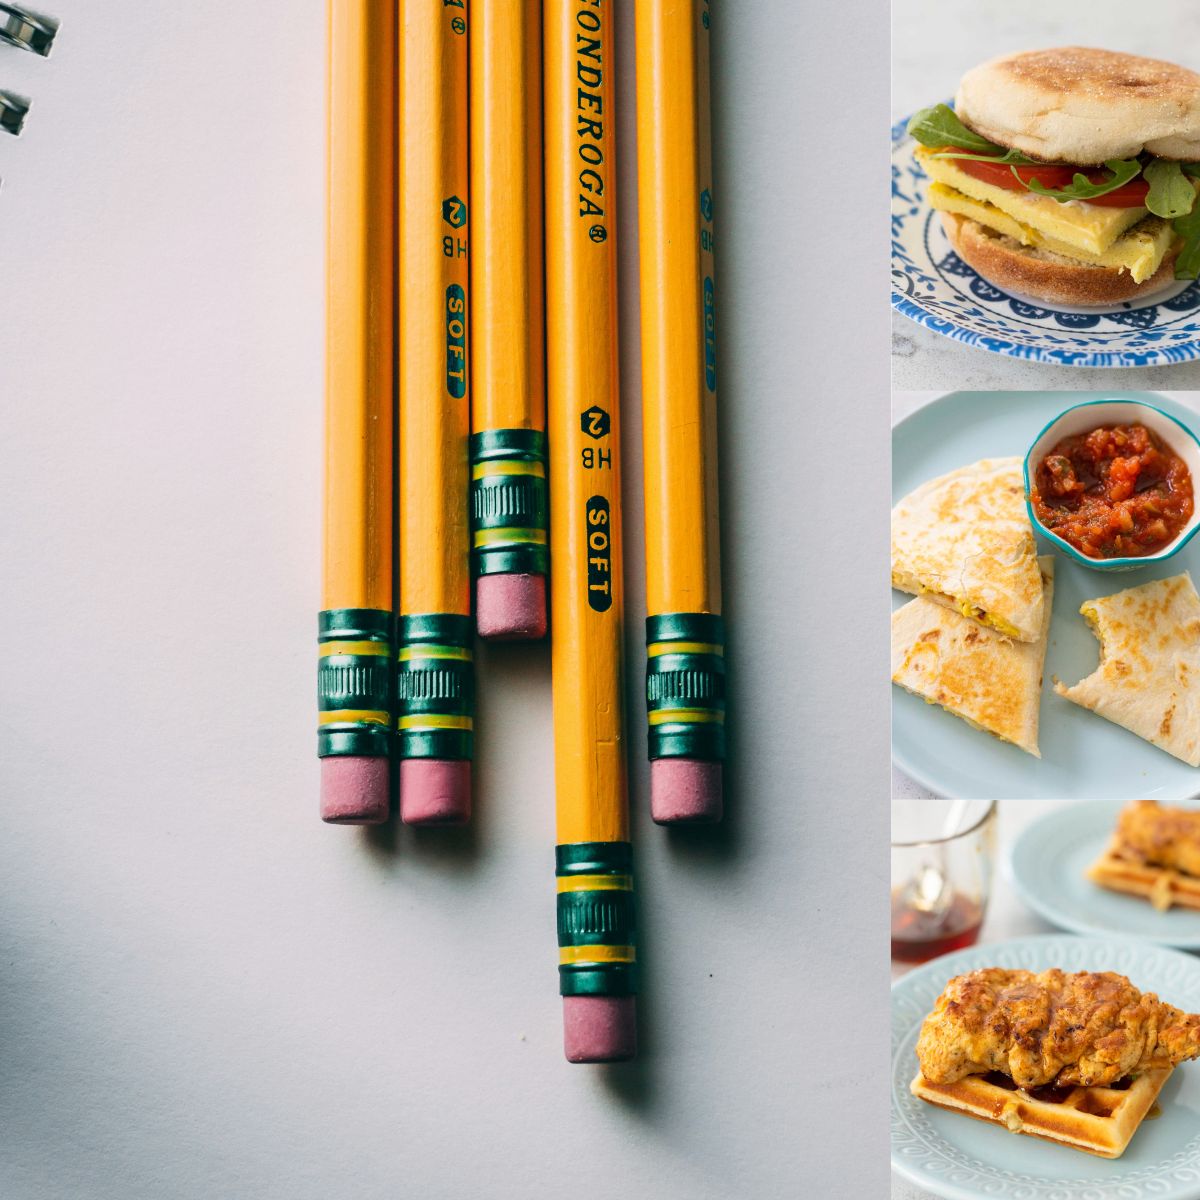 The photo collage shows a stack of #2 pencils next to 3 recipes for breakfast.